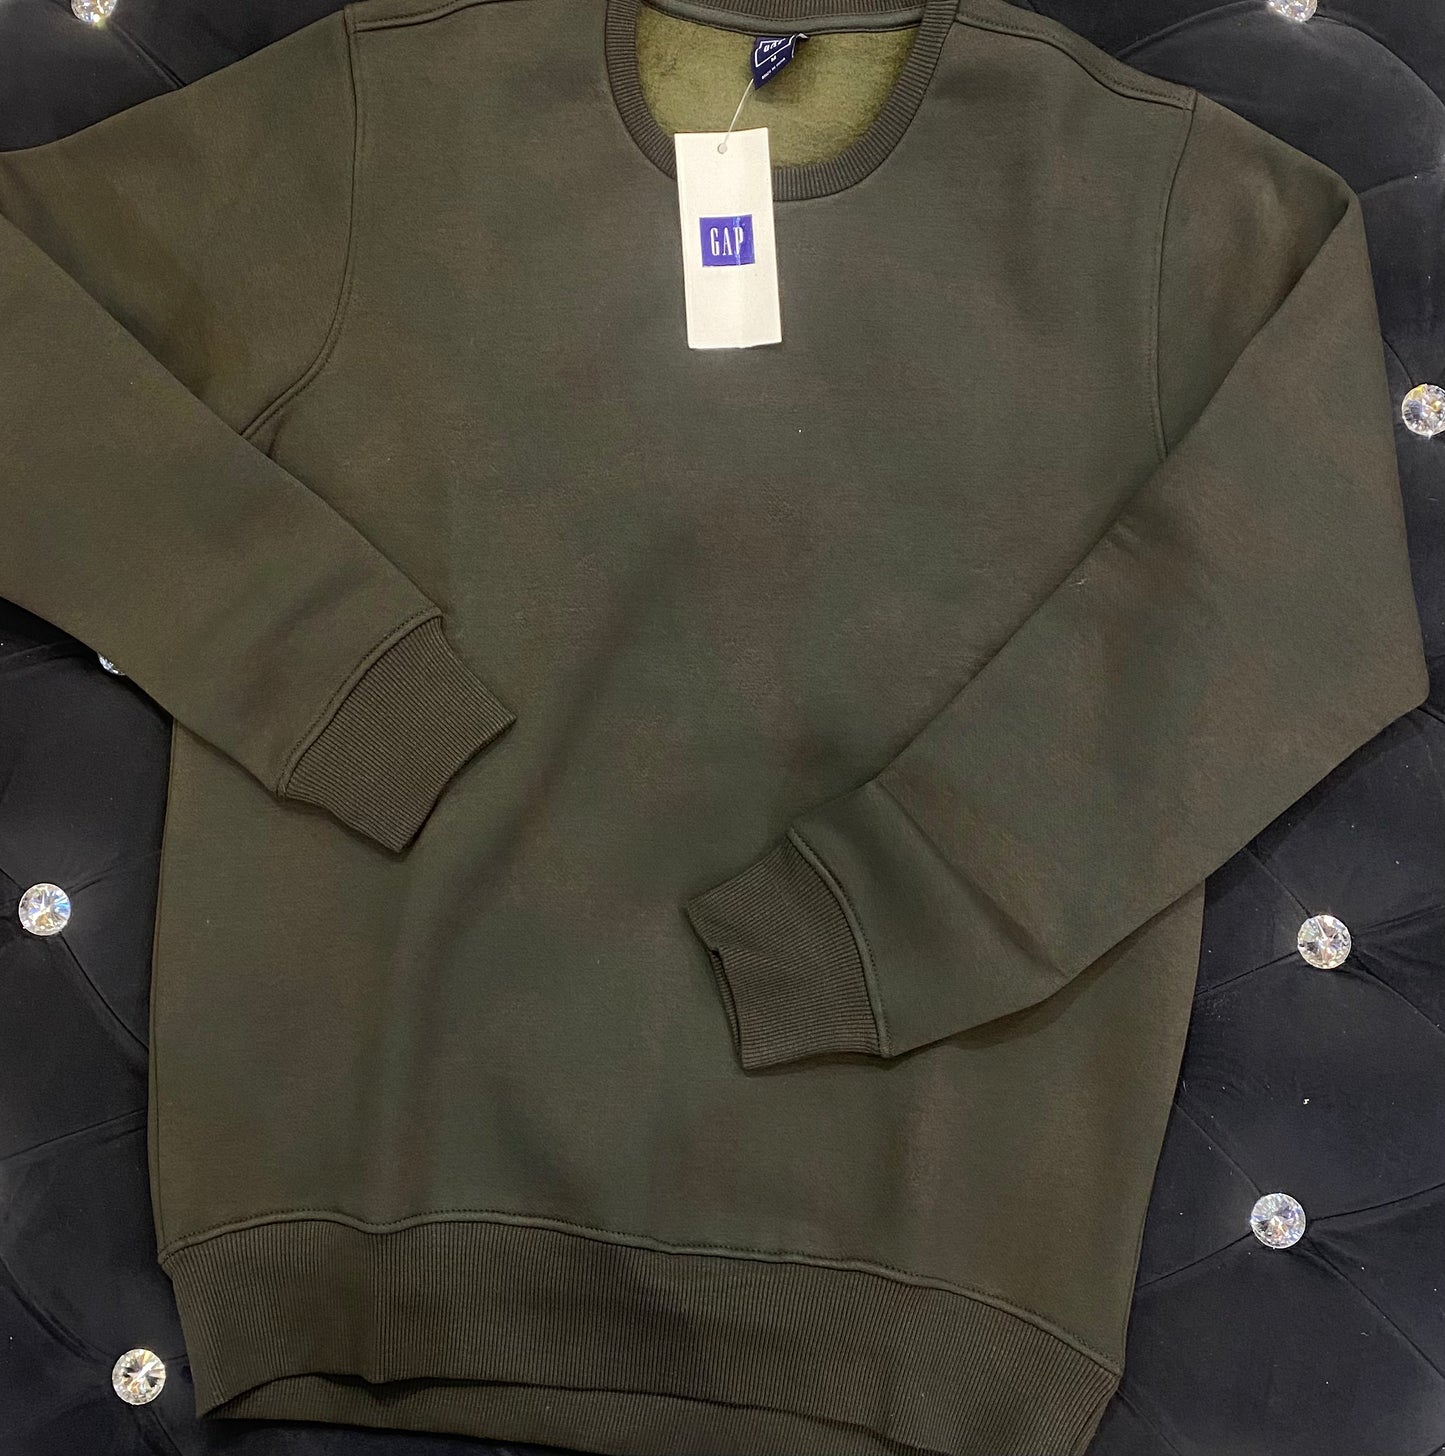 PAG Olive Green Colour With G Print Imported Fabric Sweatshirt 19508